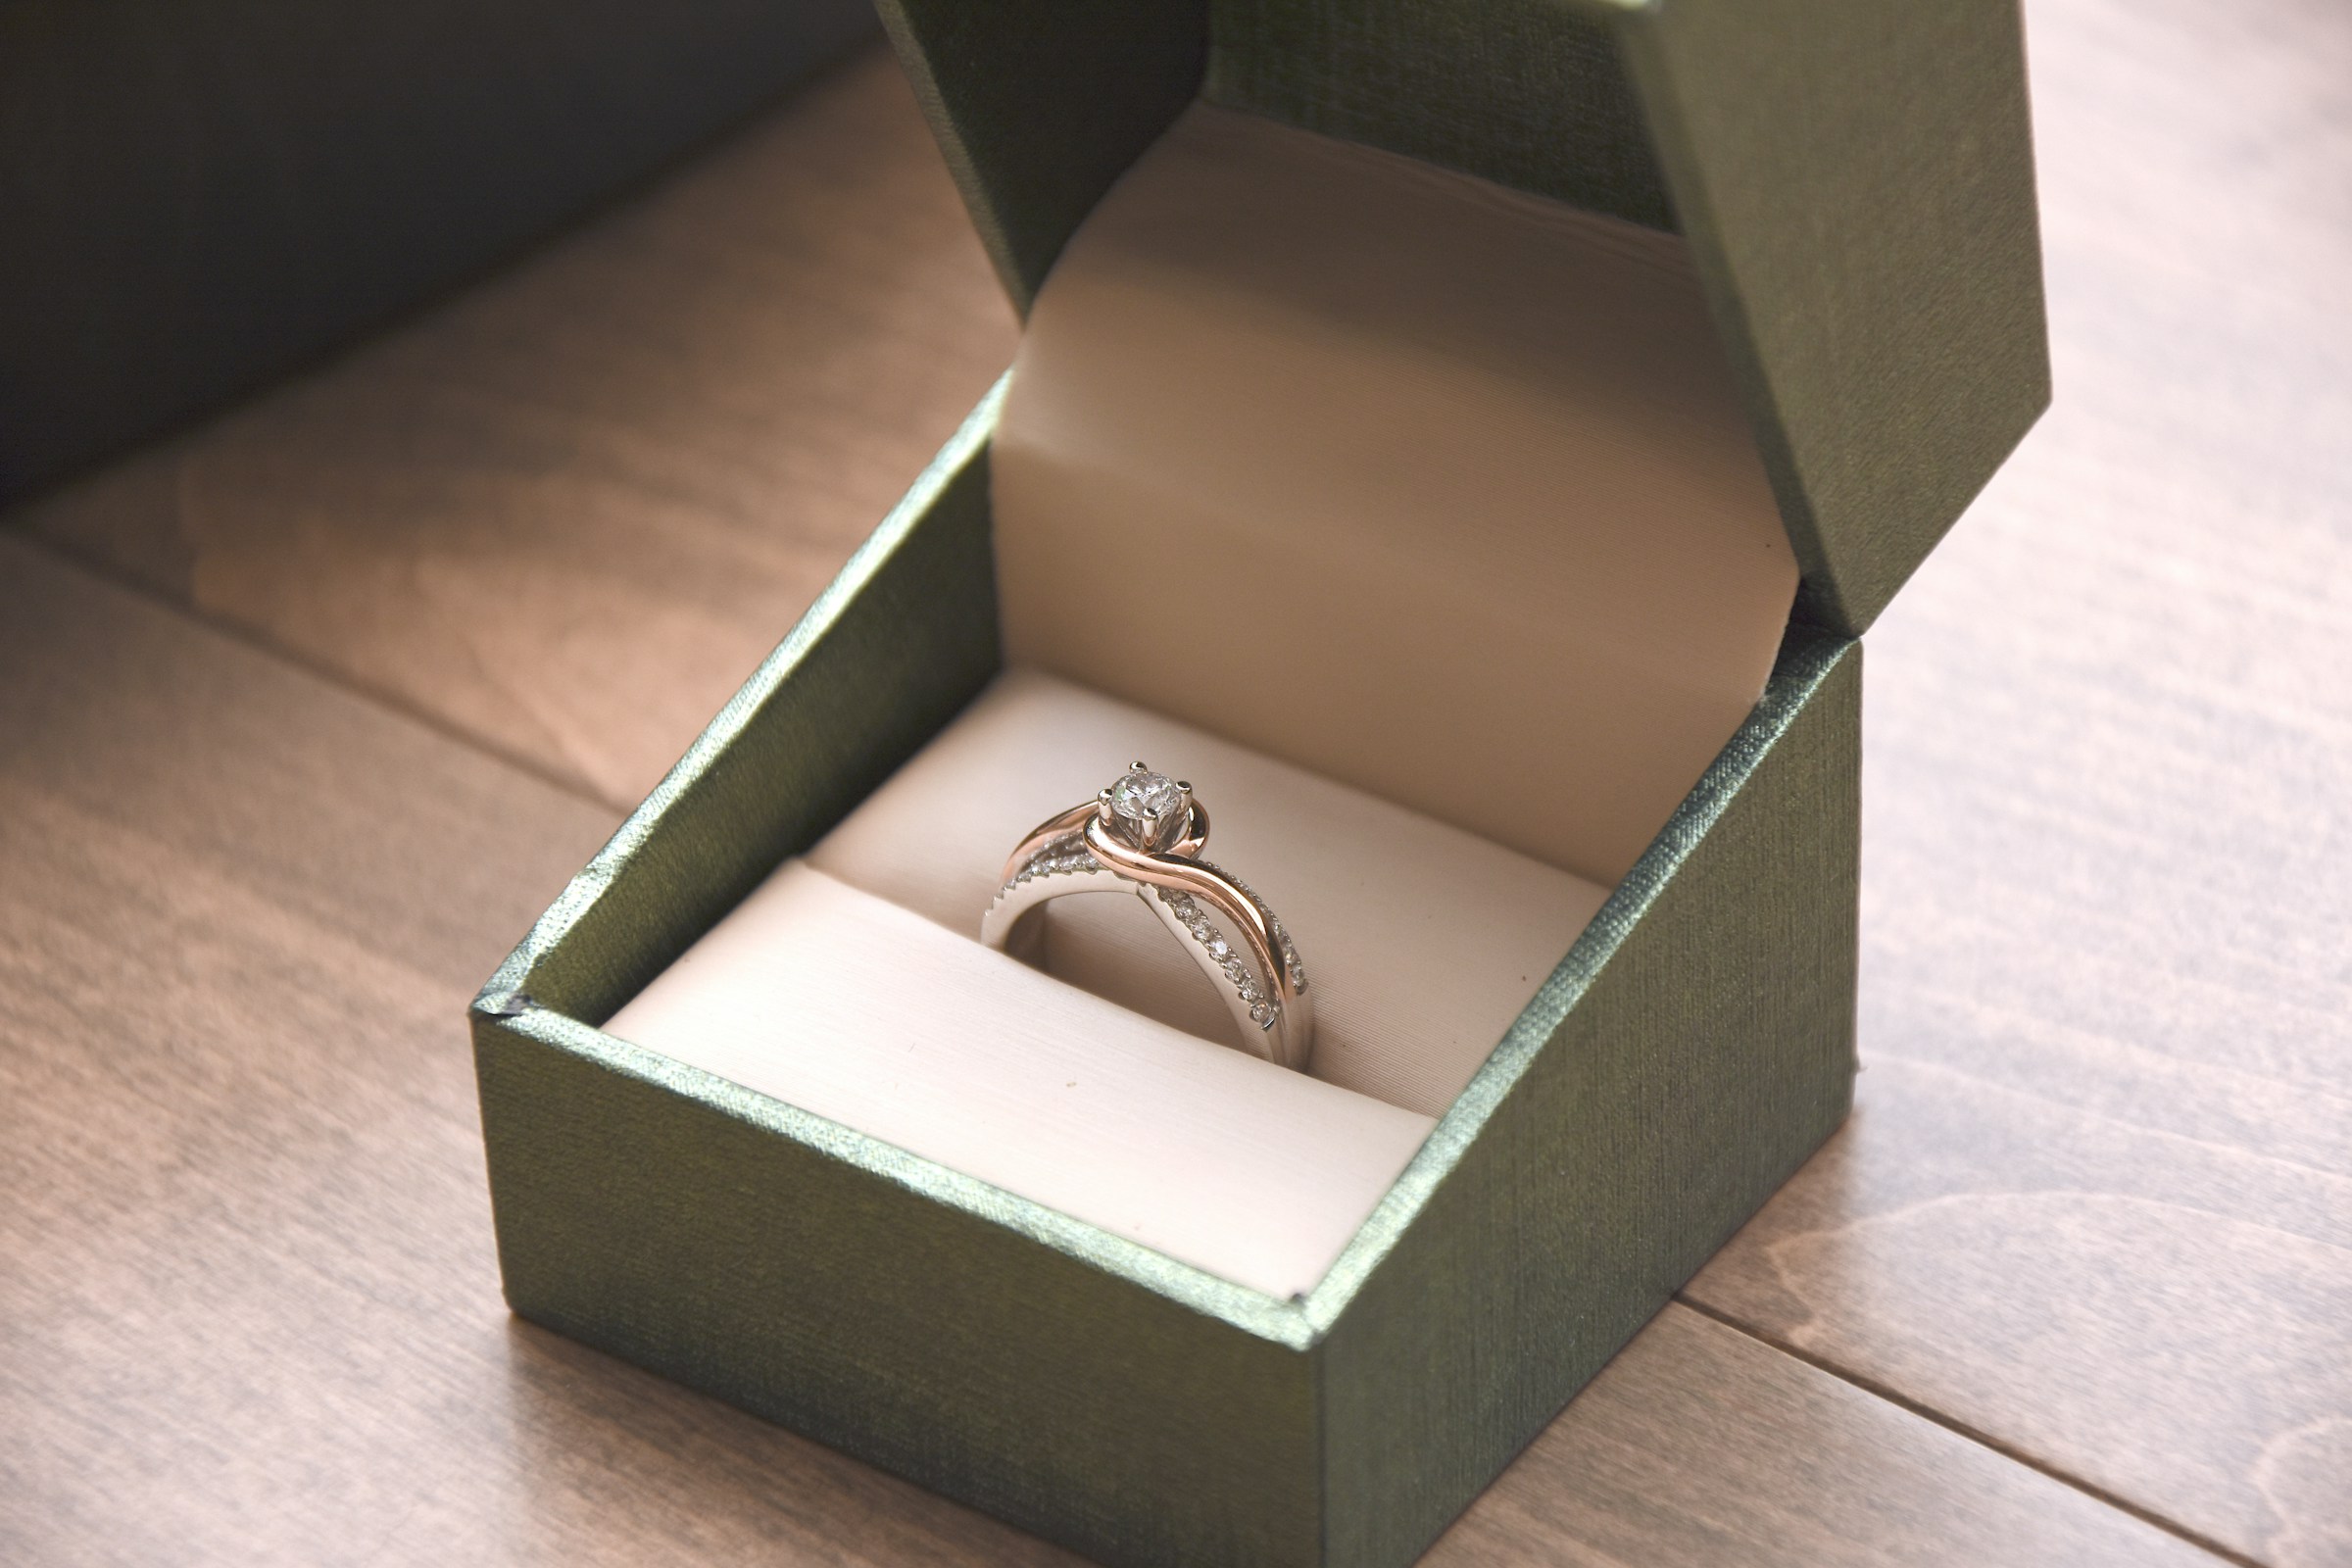 A silver ring in a box | Source: Unsplash